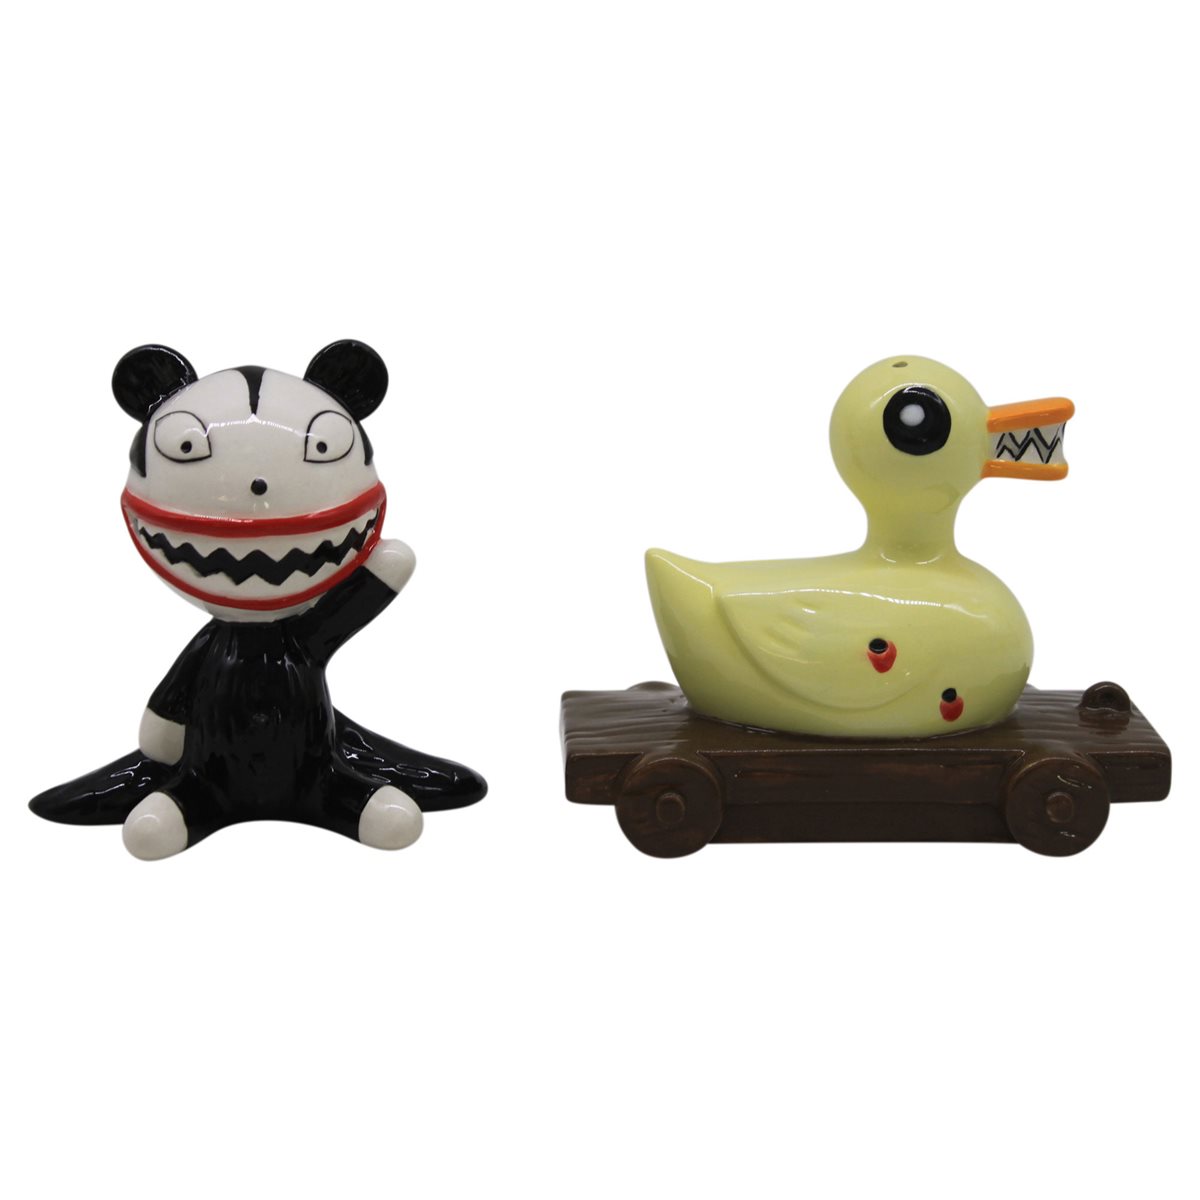 2019 Nightmare Before Christmas - Scary Teddy and Undead Duck - Ltd